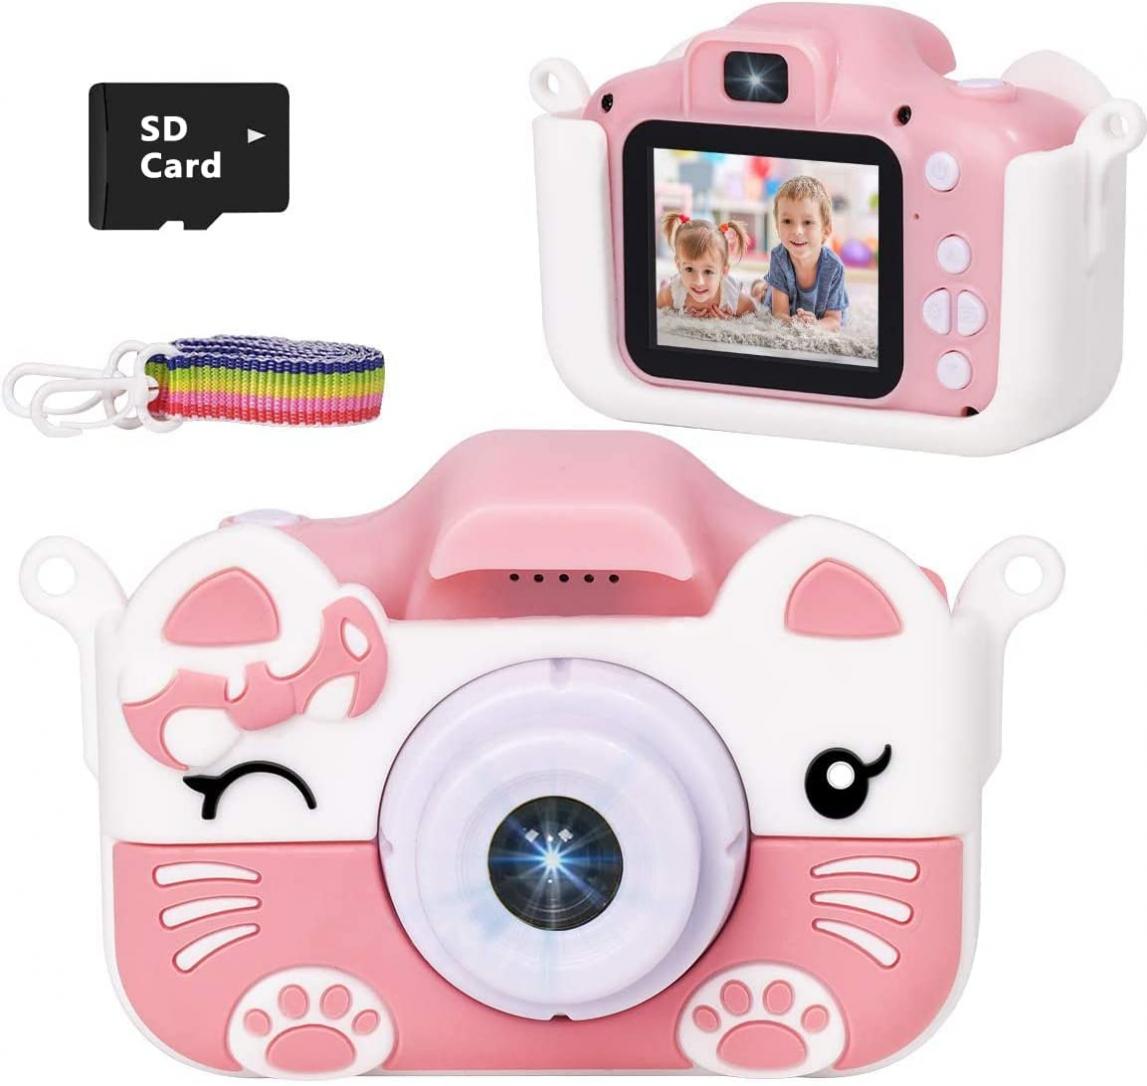 Xinbeiya Kids Selfie Digital Camera，Birthday Toy Gift for Girls Boys Age 2-10, Children Cameras for Toddler with 1080P Video，Portable and Rechargeable Toy Camera for Girls or Boys (Pink)